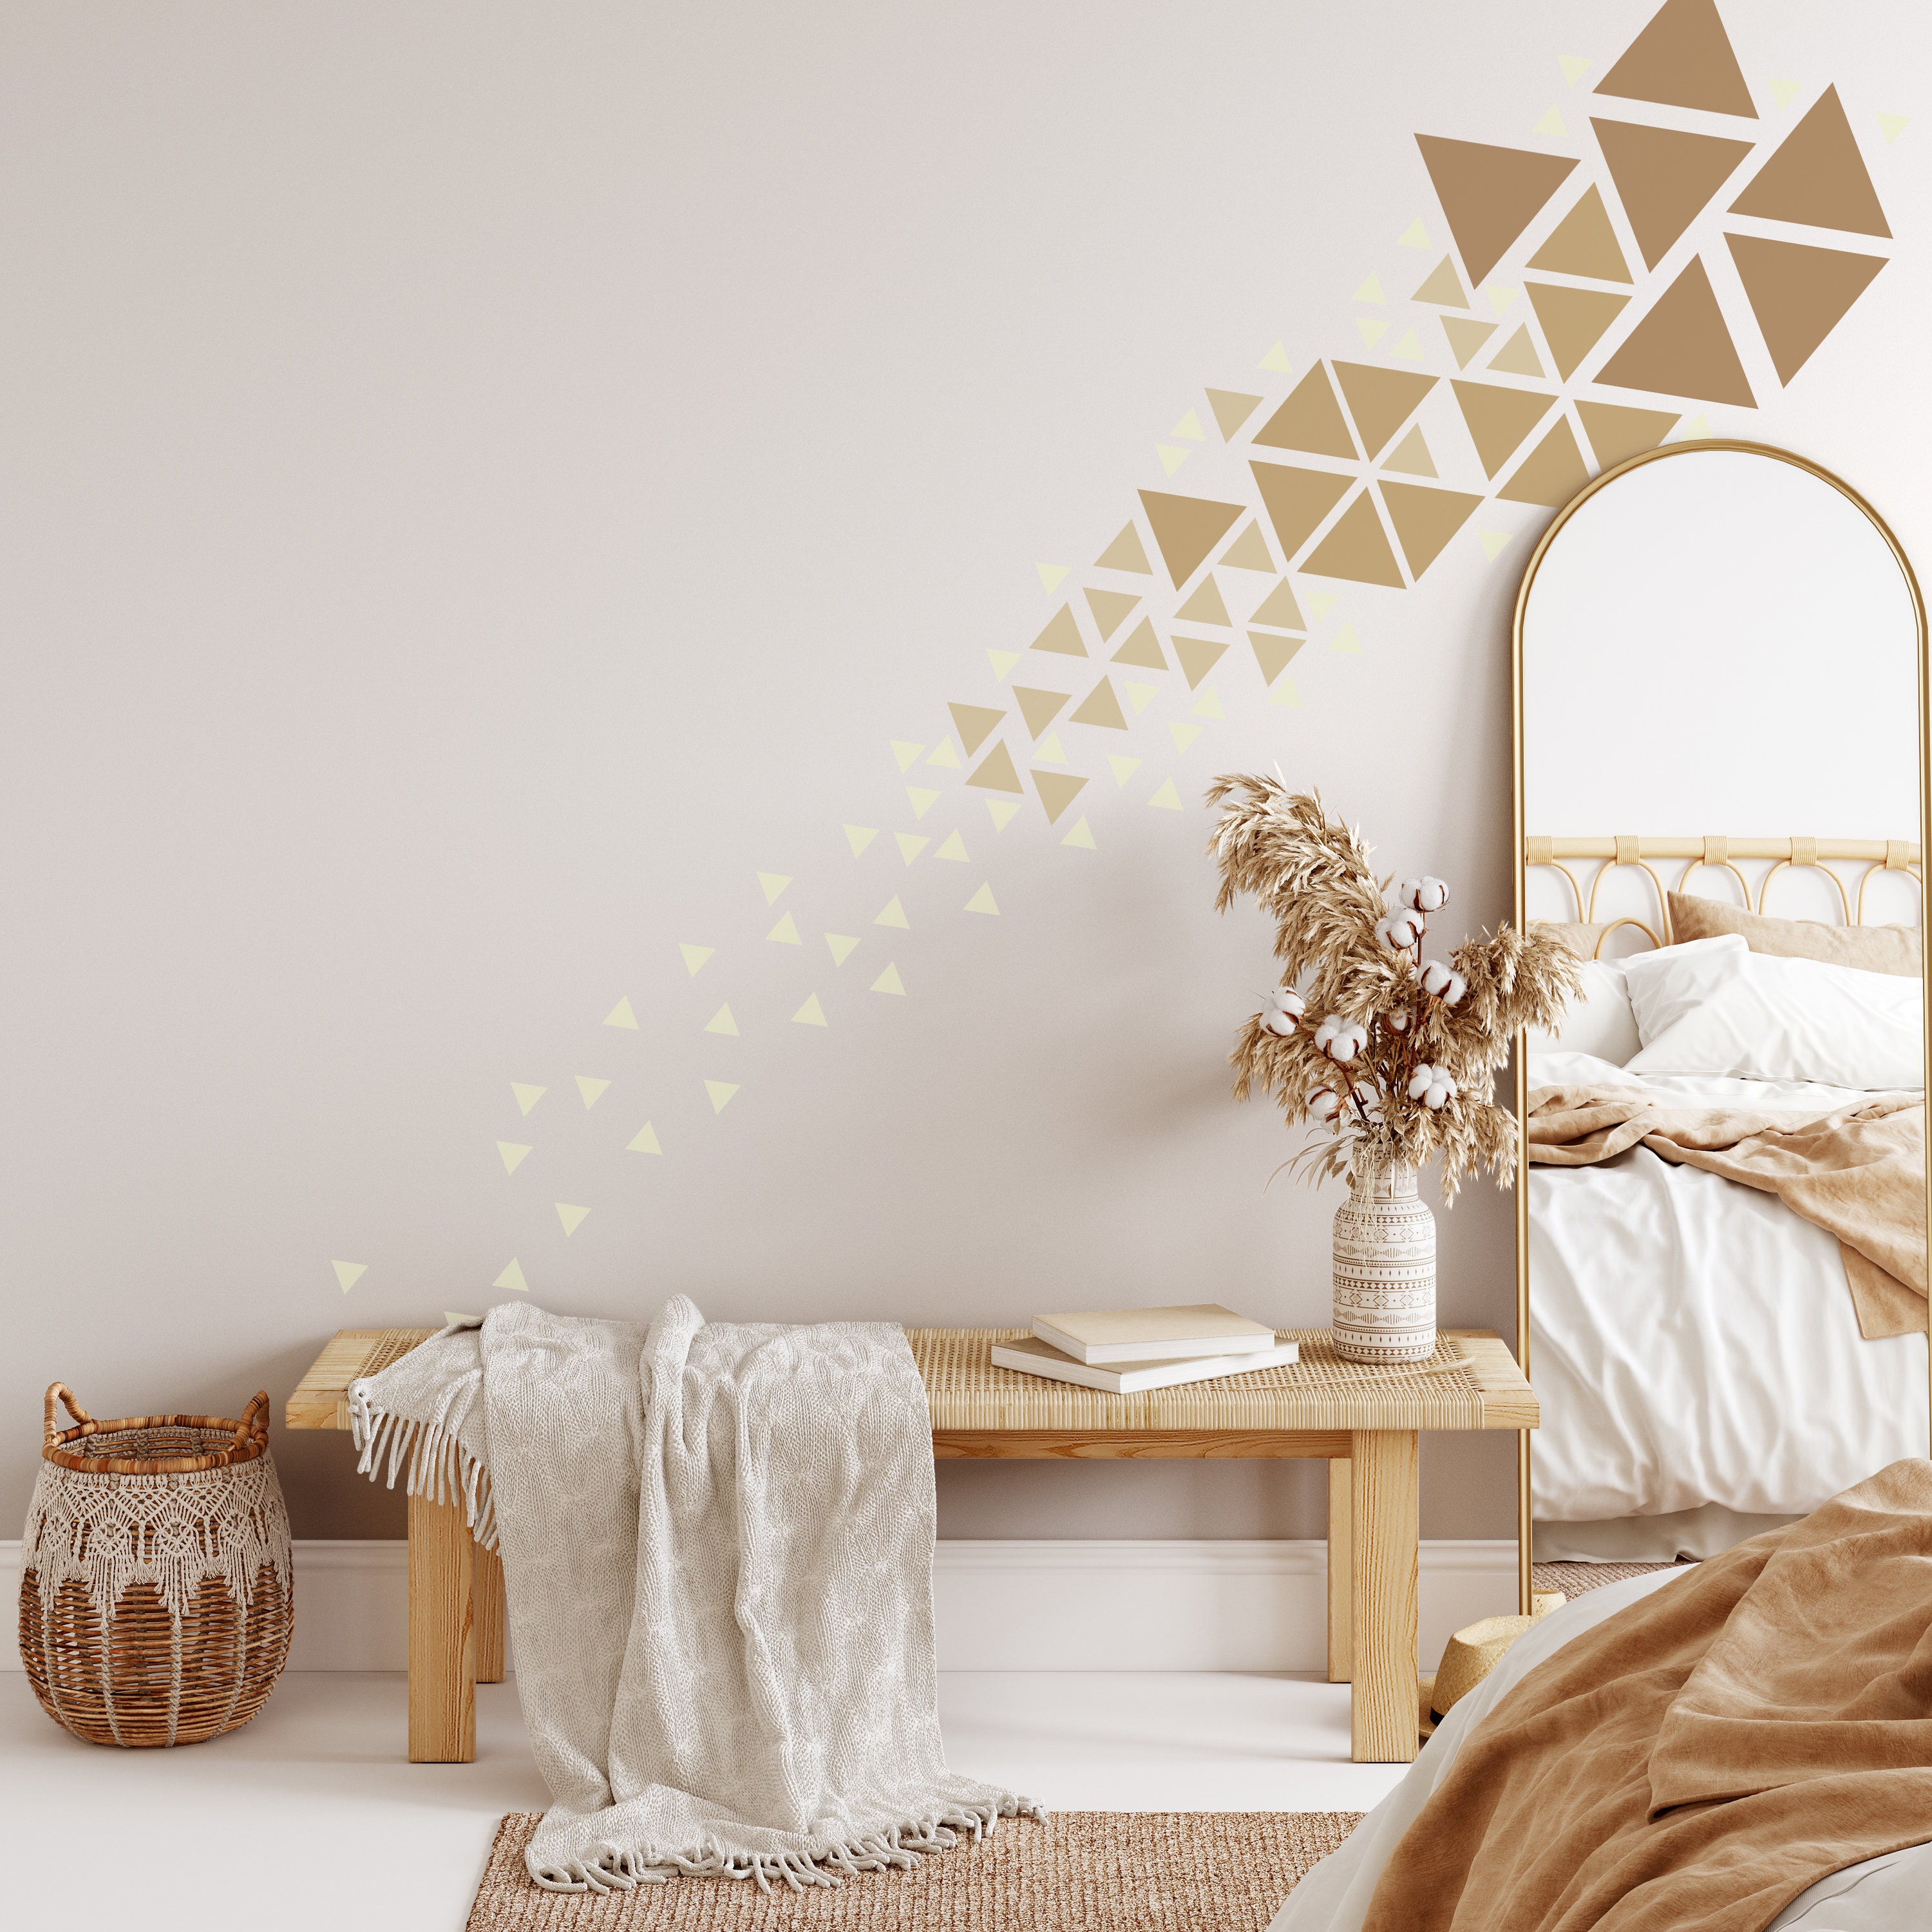 Geometric Wall Decal, Geometric Line, Wall Sticker, Peel and Stick Lines,  Cottage Core, Room Decor, Indie Room Decor, Home Decore, Wall Art 